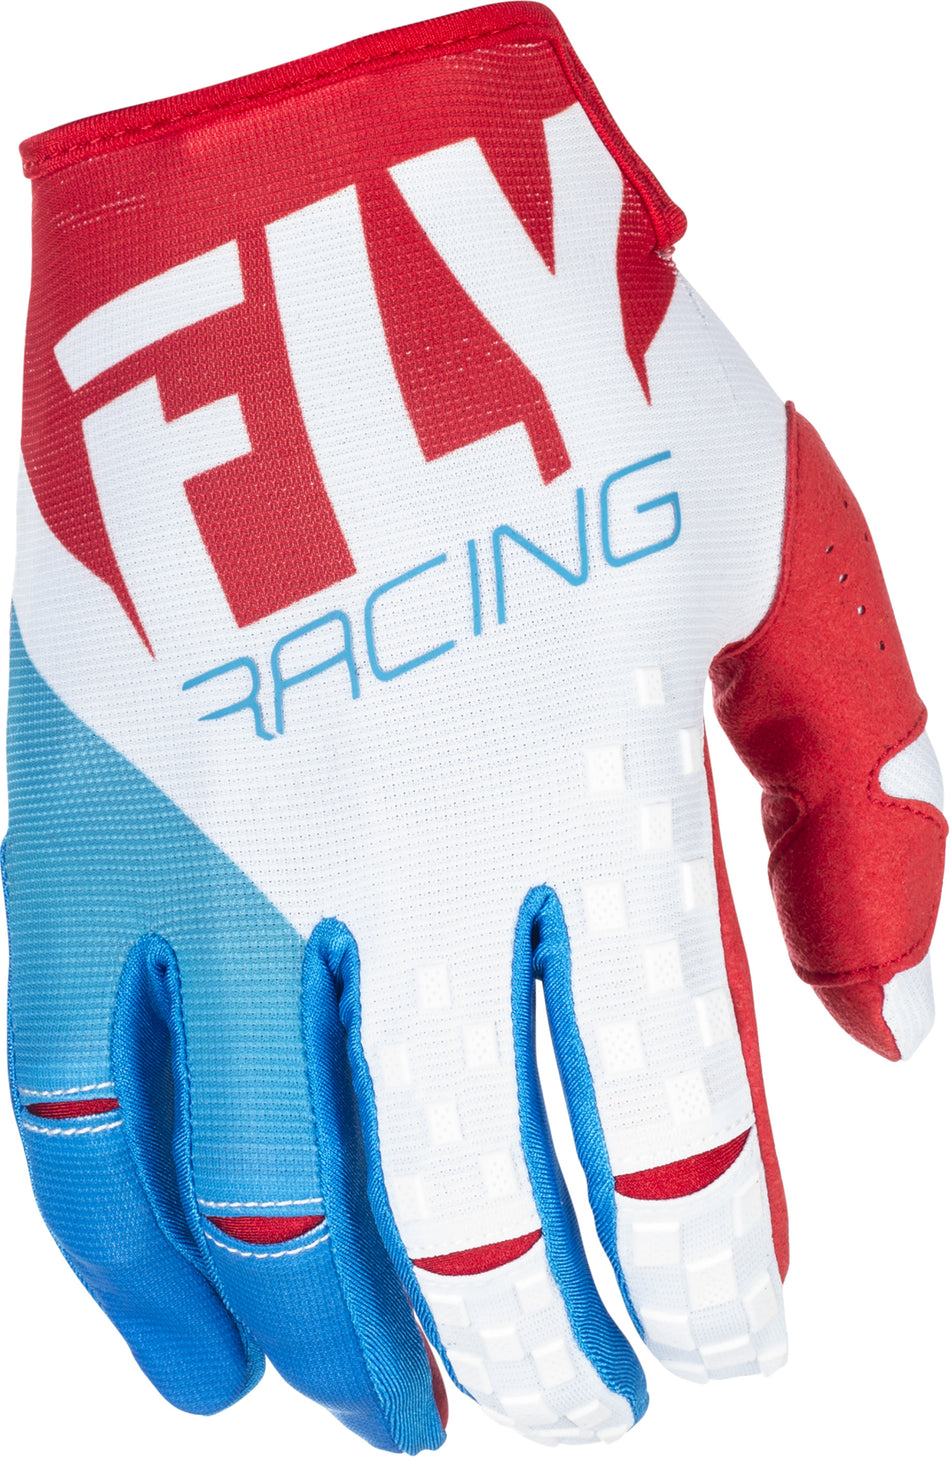 FLY RACING Kinetic Gloves Red/White/Blue Sz 7 371-41307